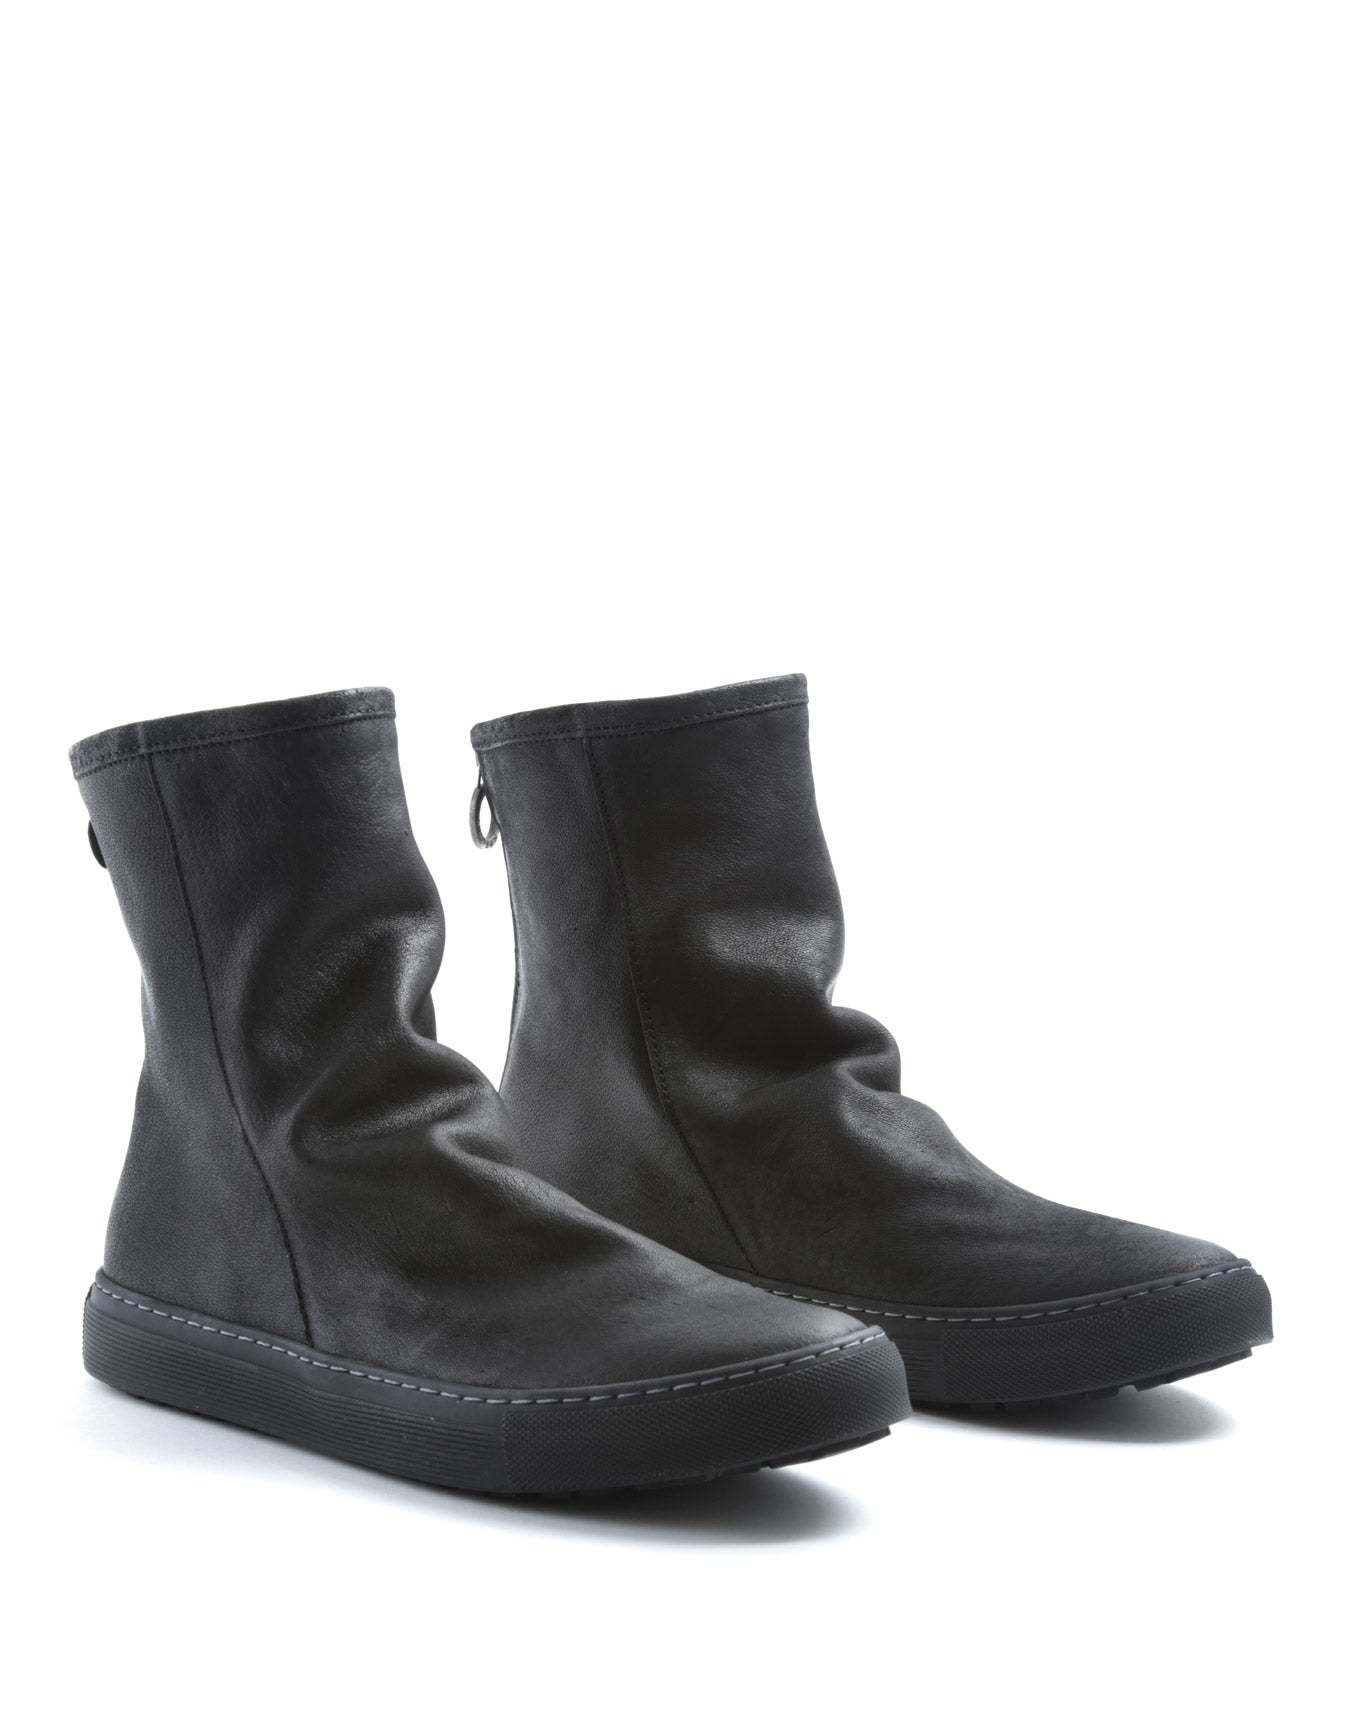 FIORENTINI + BAKER, BOLT BLIN, Sneaker boot for all year-round that combines style and comfort. Handcrafted with natural leather by skilled artisans. Made in Italy. Made to last.